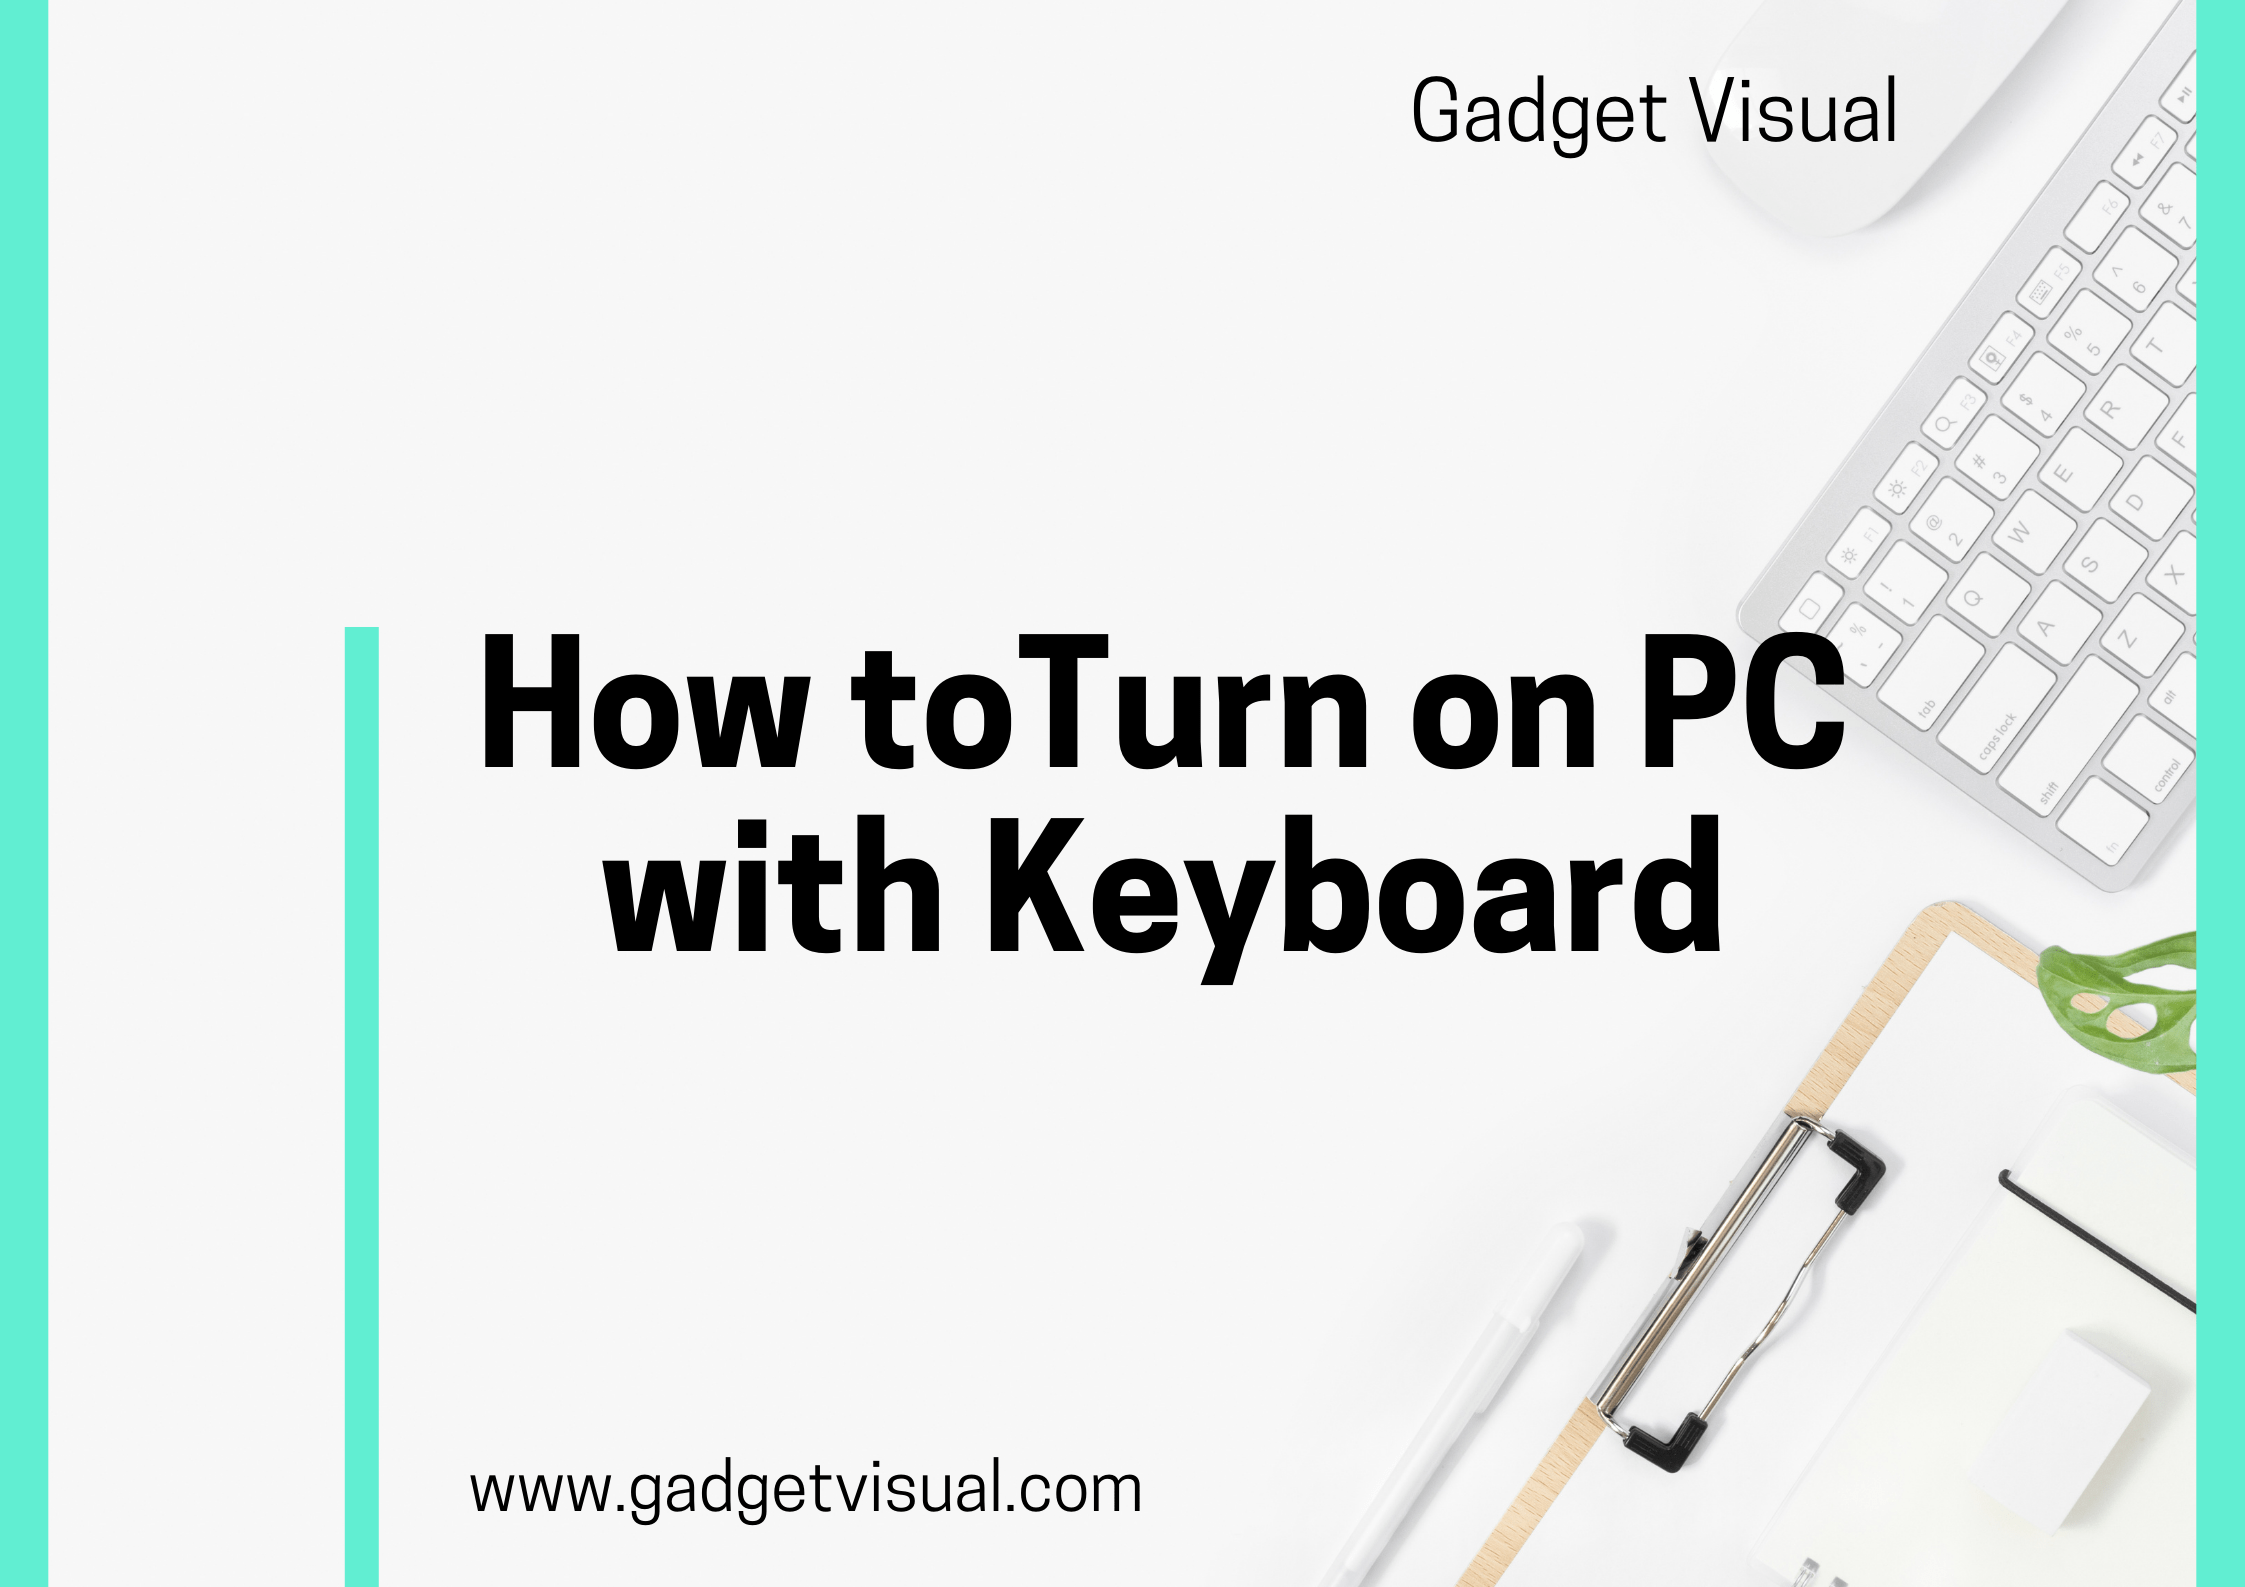 how to turn on pc with keyboard - Gadget Visual